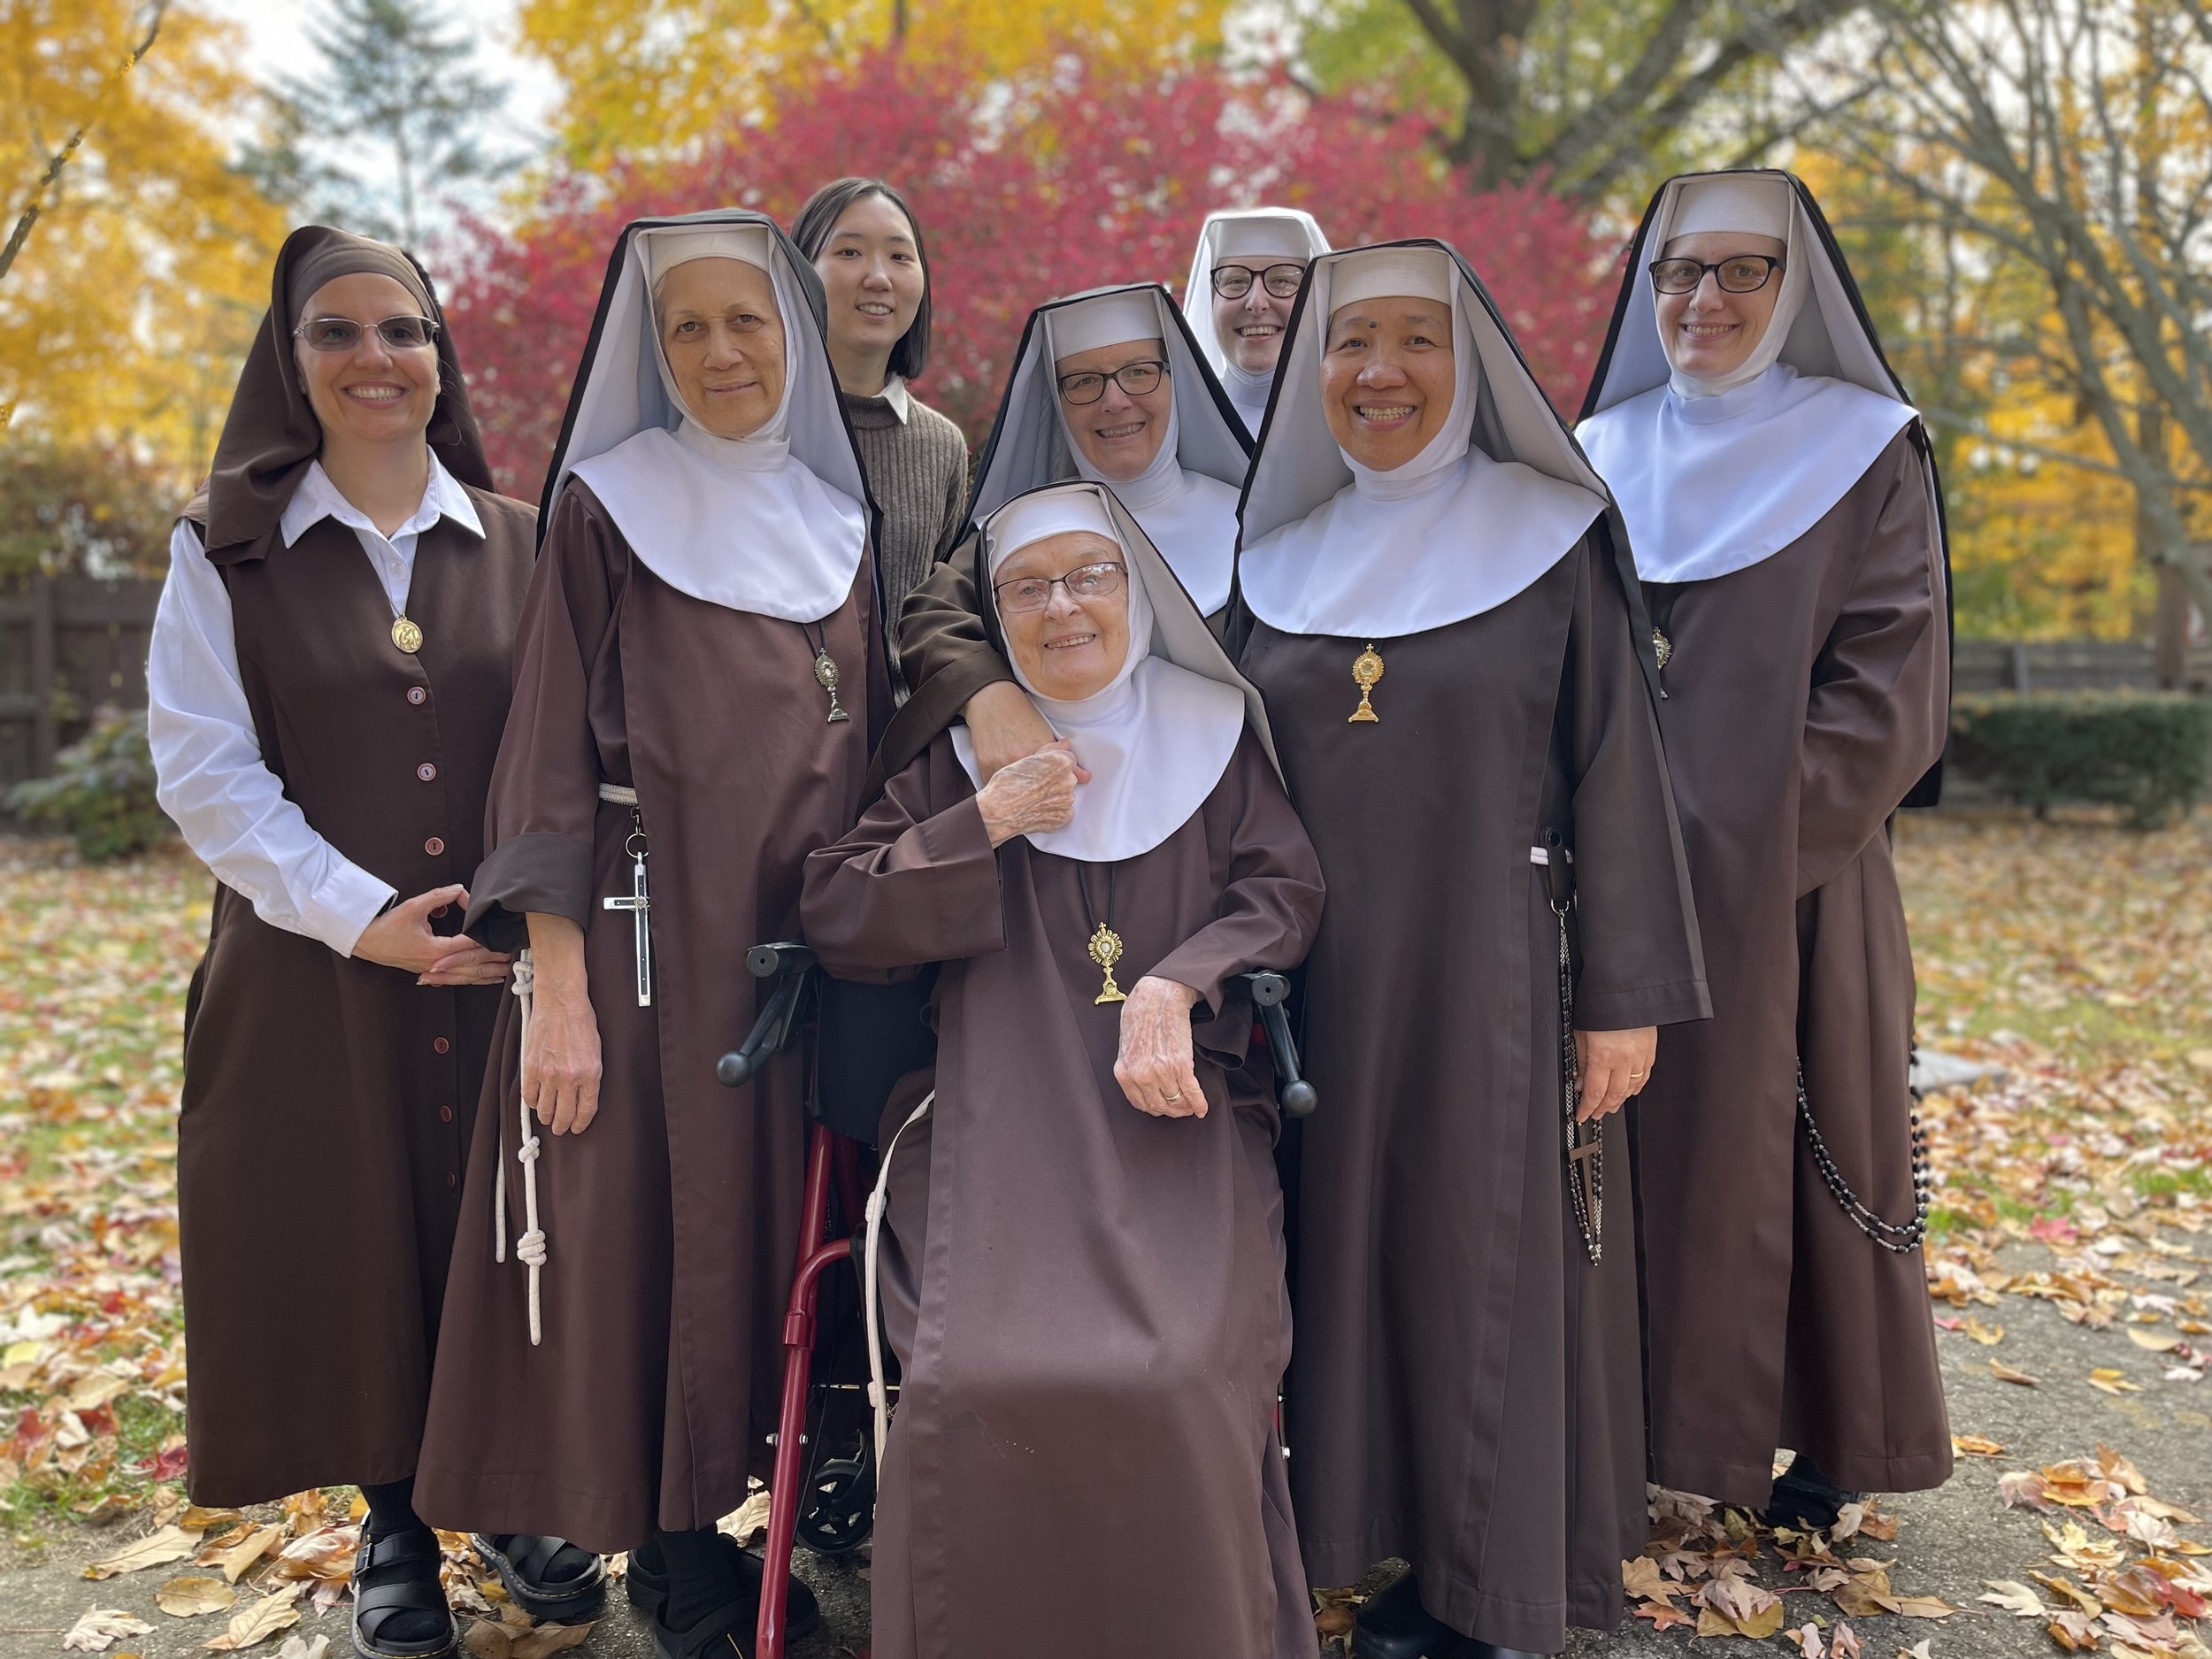 From left to right: Sr. Mary Faustina as a postulant, Sr. Mary Magdalen, Lucia, Sr. Marion Celine, Sr. Dolores Marie, Sr. Thérèse Marie, Mother Mary Gertrude, and Sr. Bridget Marie